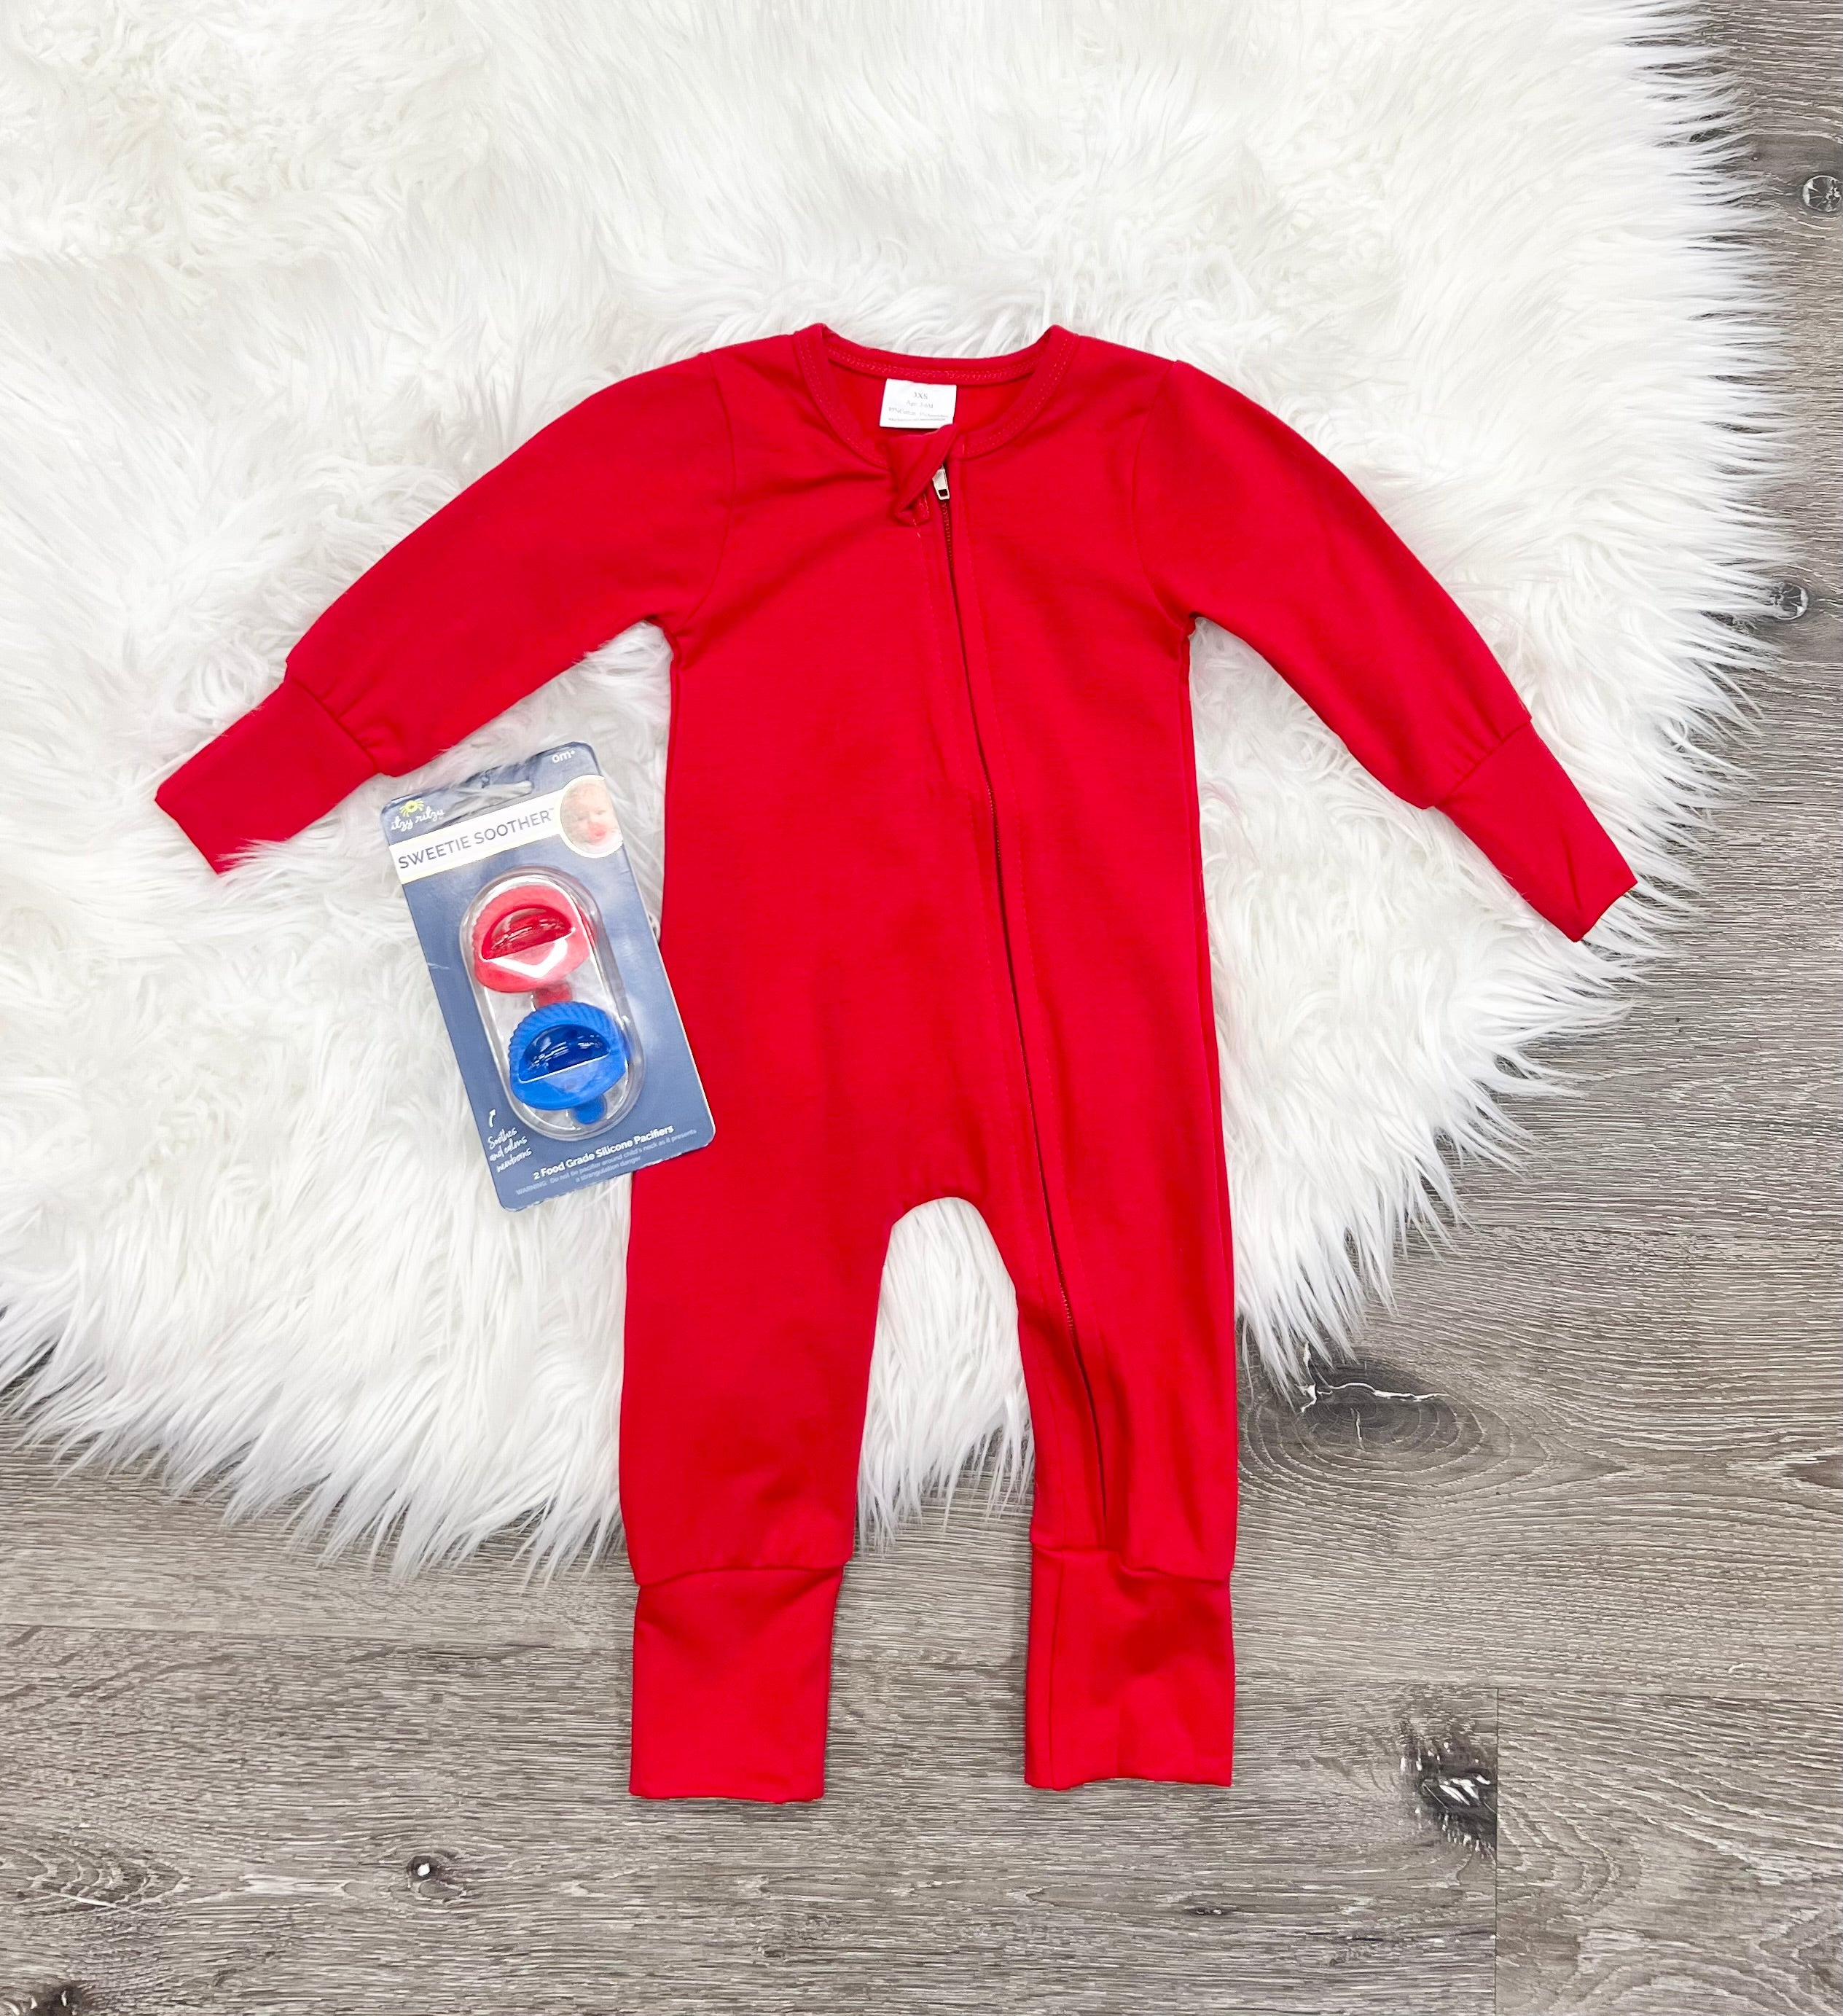 Buy red Colored Zippy Jammie’s